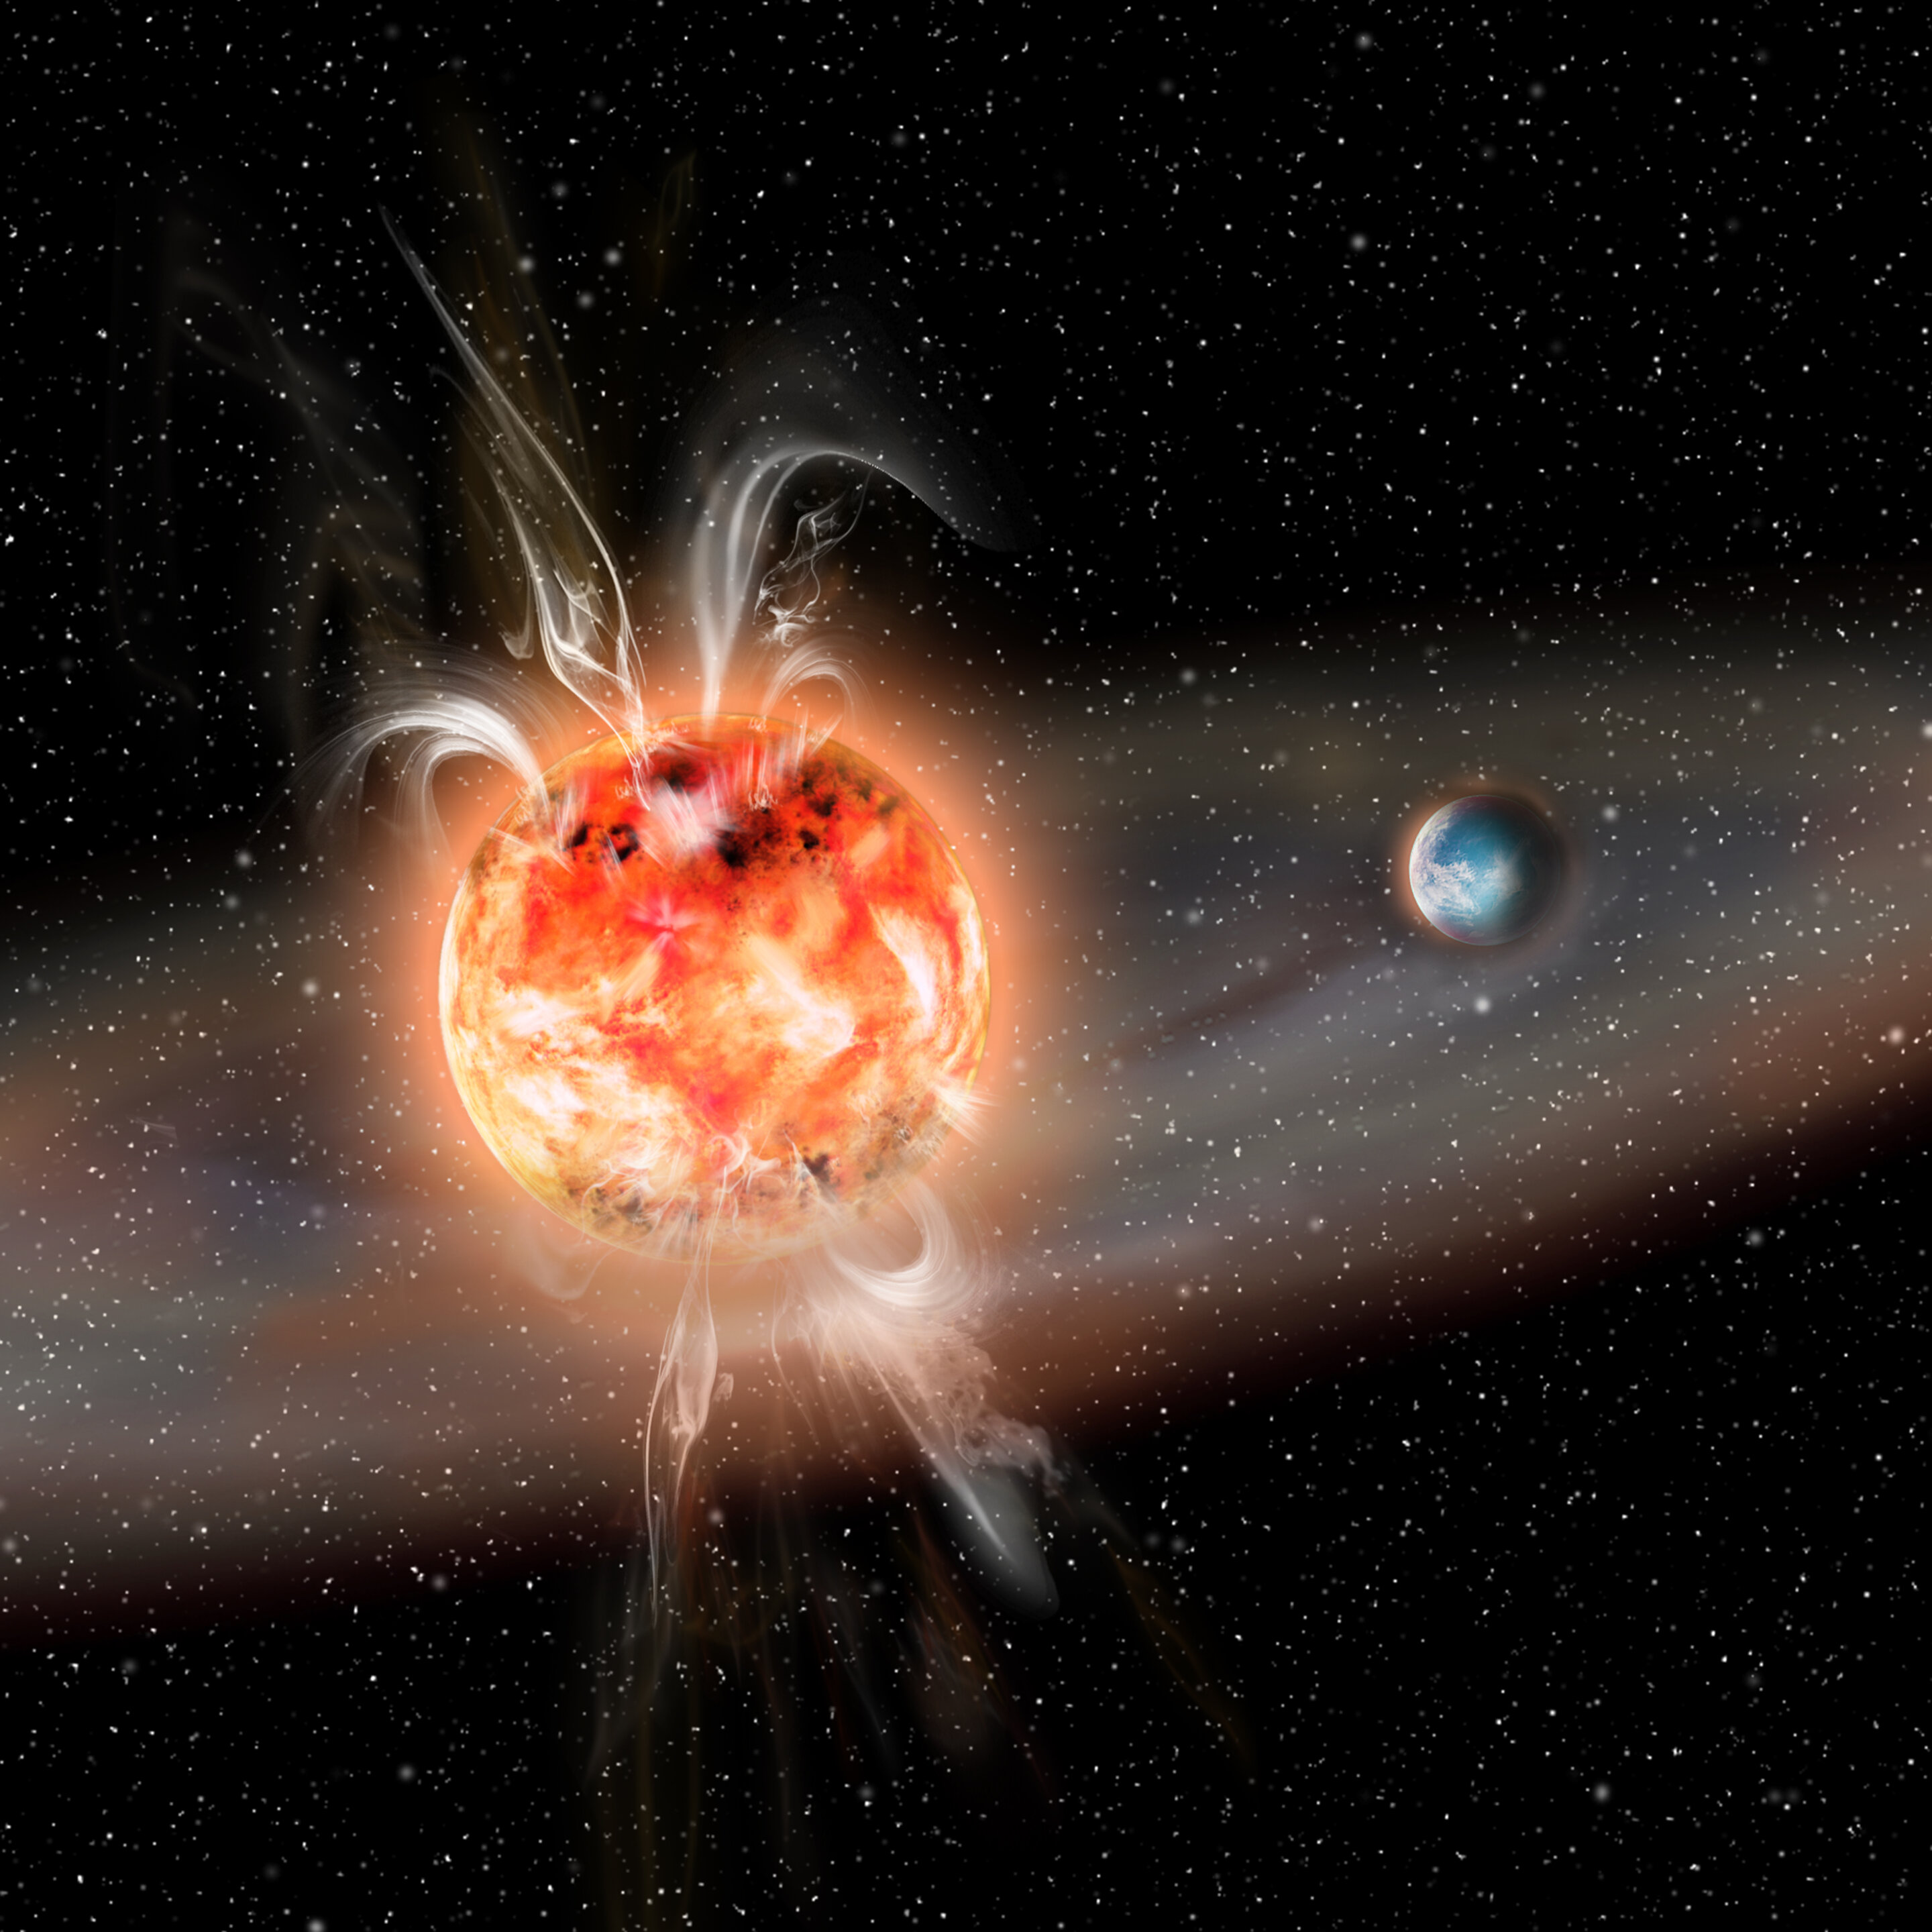 Red Dwarf Superflares Less Harmful Than Thought